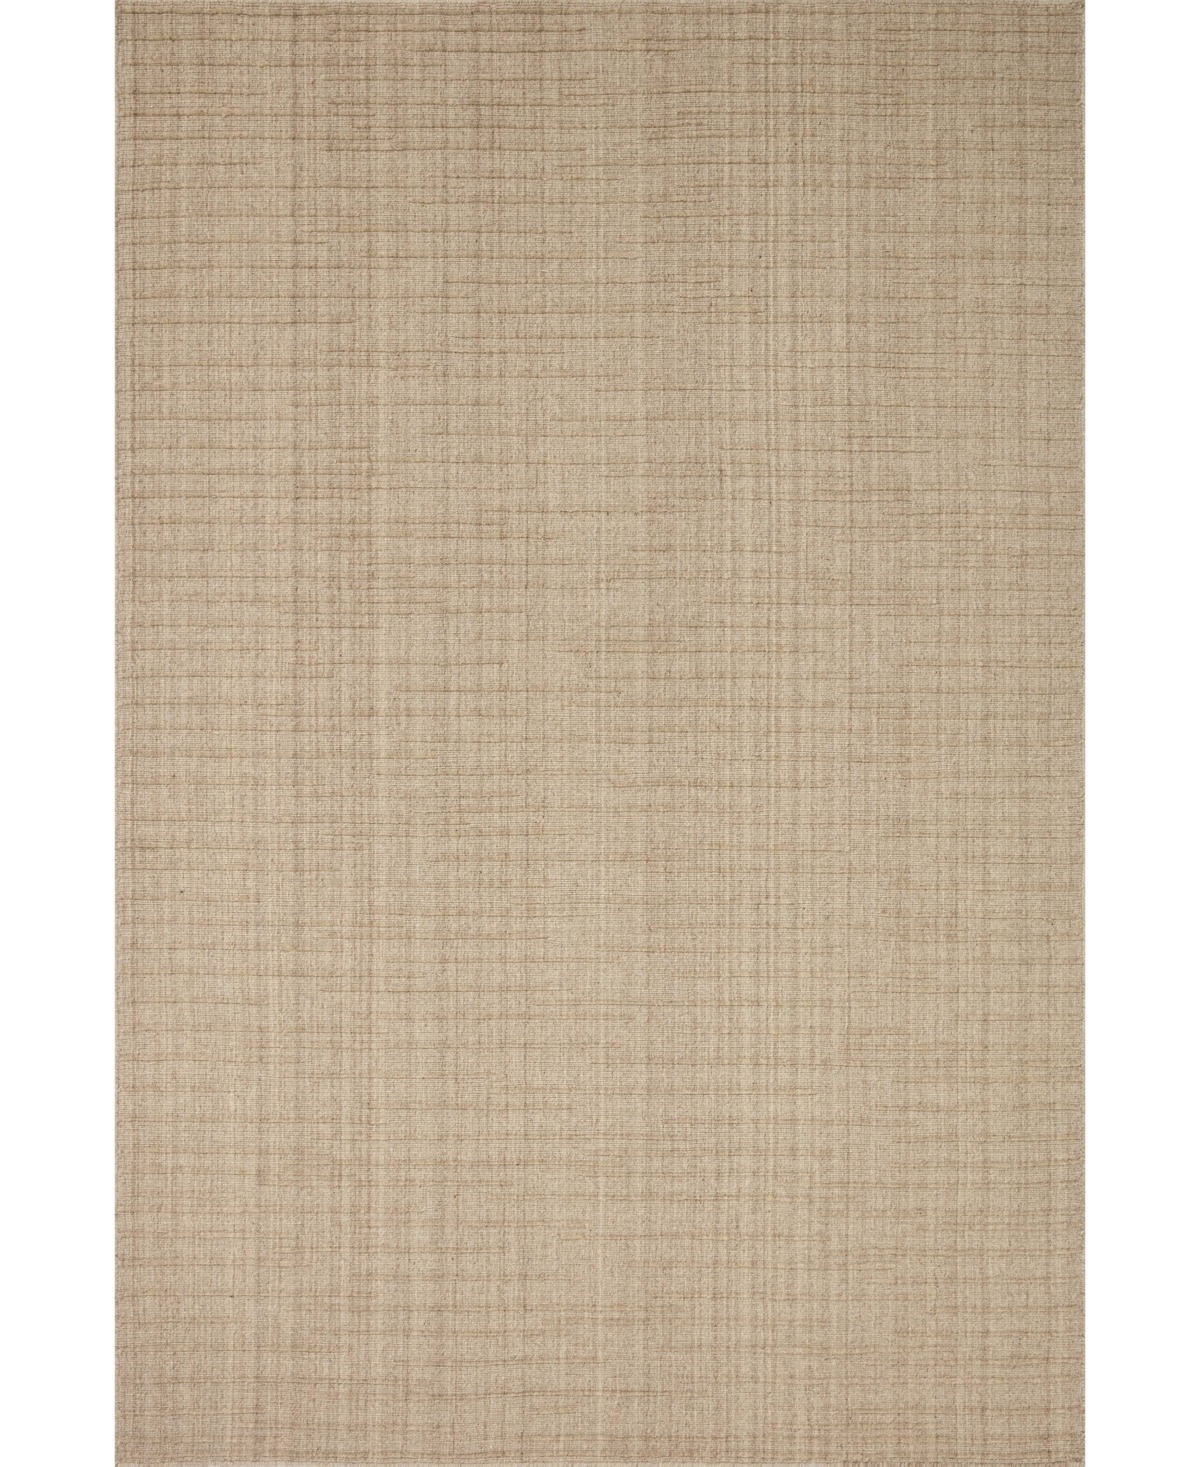 Spring Valley Home Brooks Bro-01 5' X 7'6" Area Rug In Oatmeal